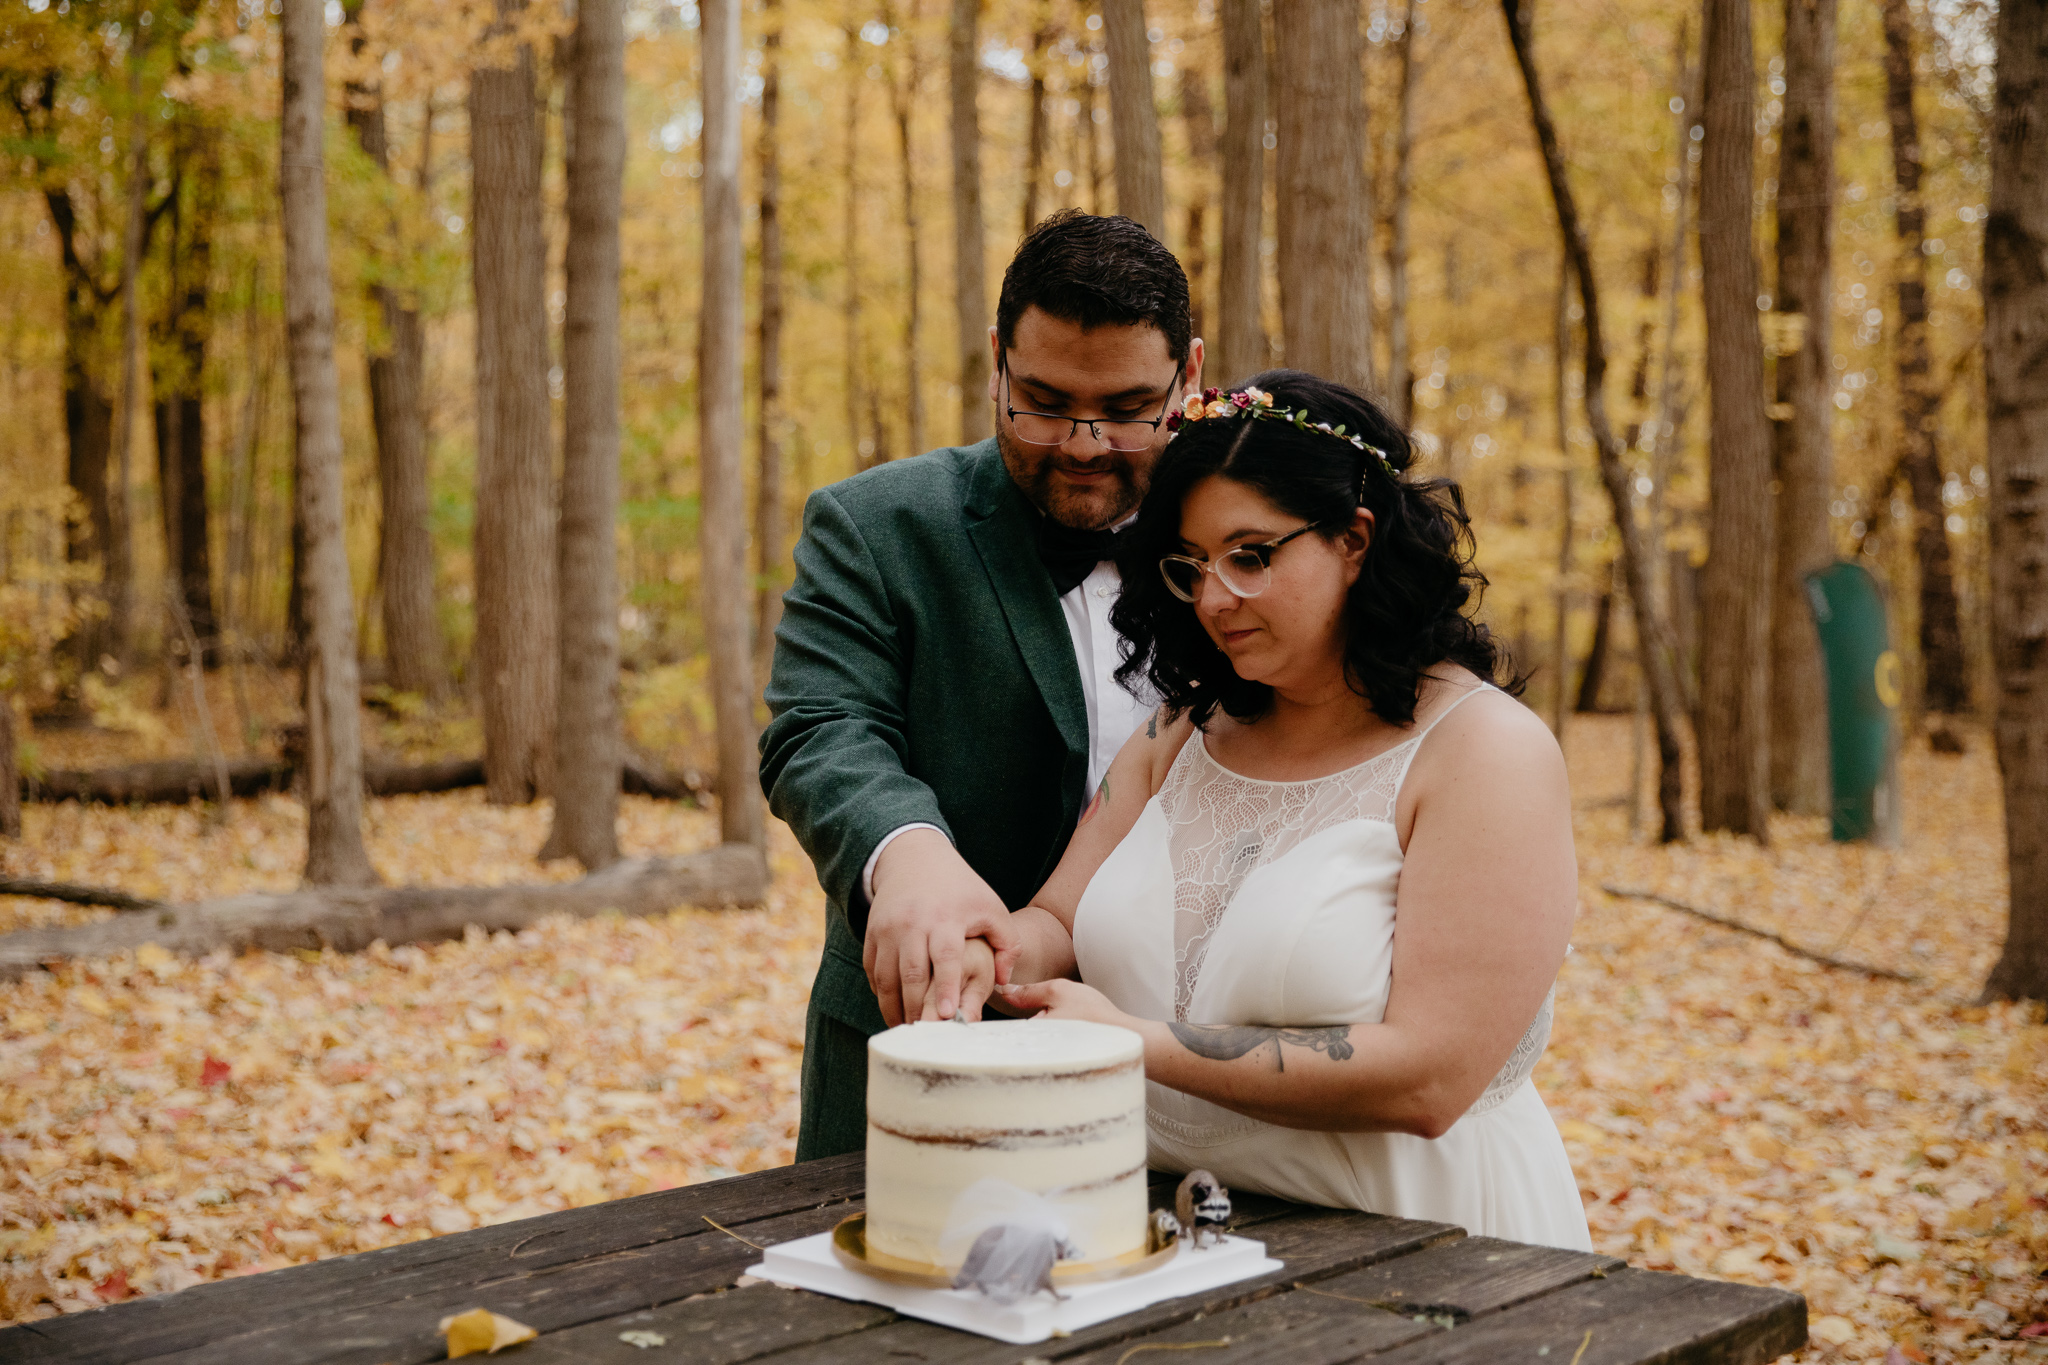 Bride and groom cutting wedding cake at campsite during their autumn Indiana elopement